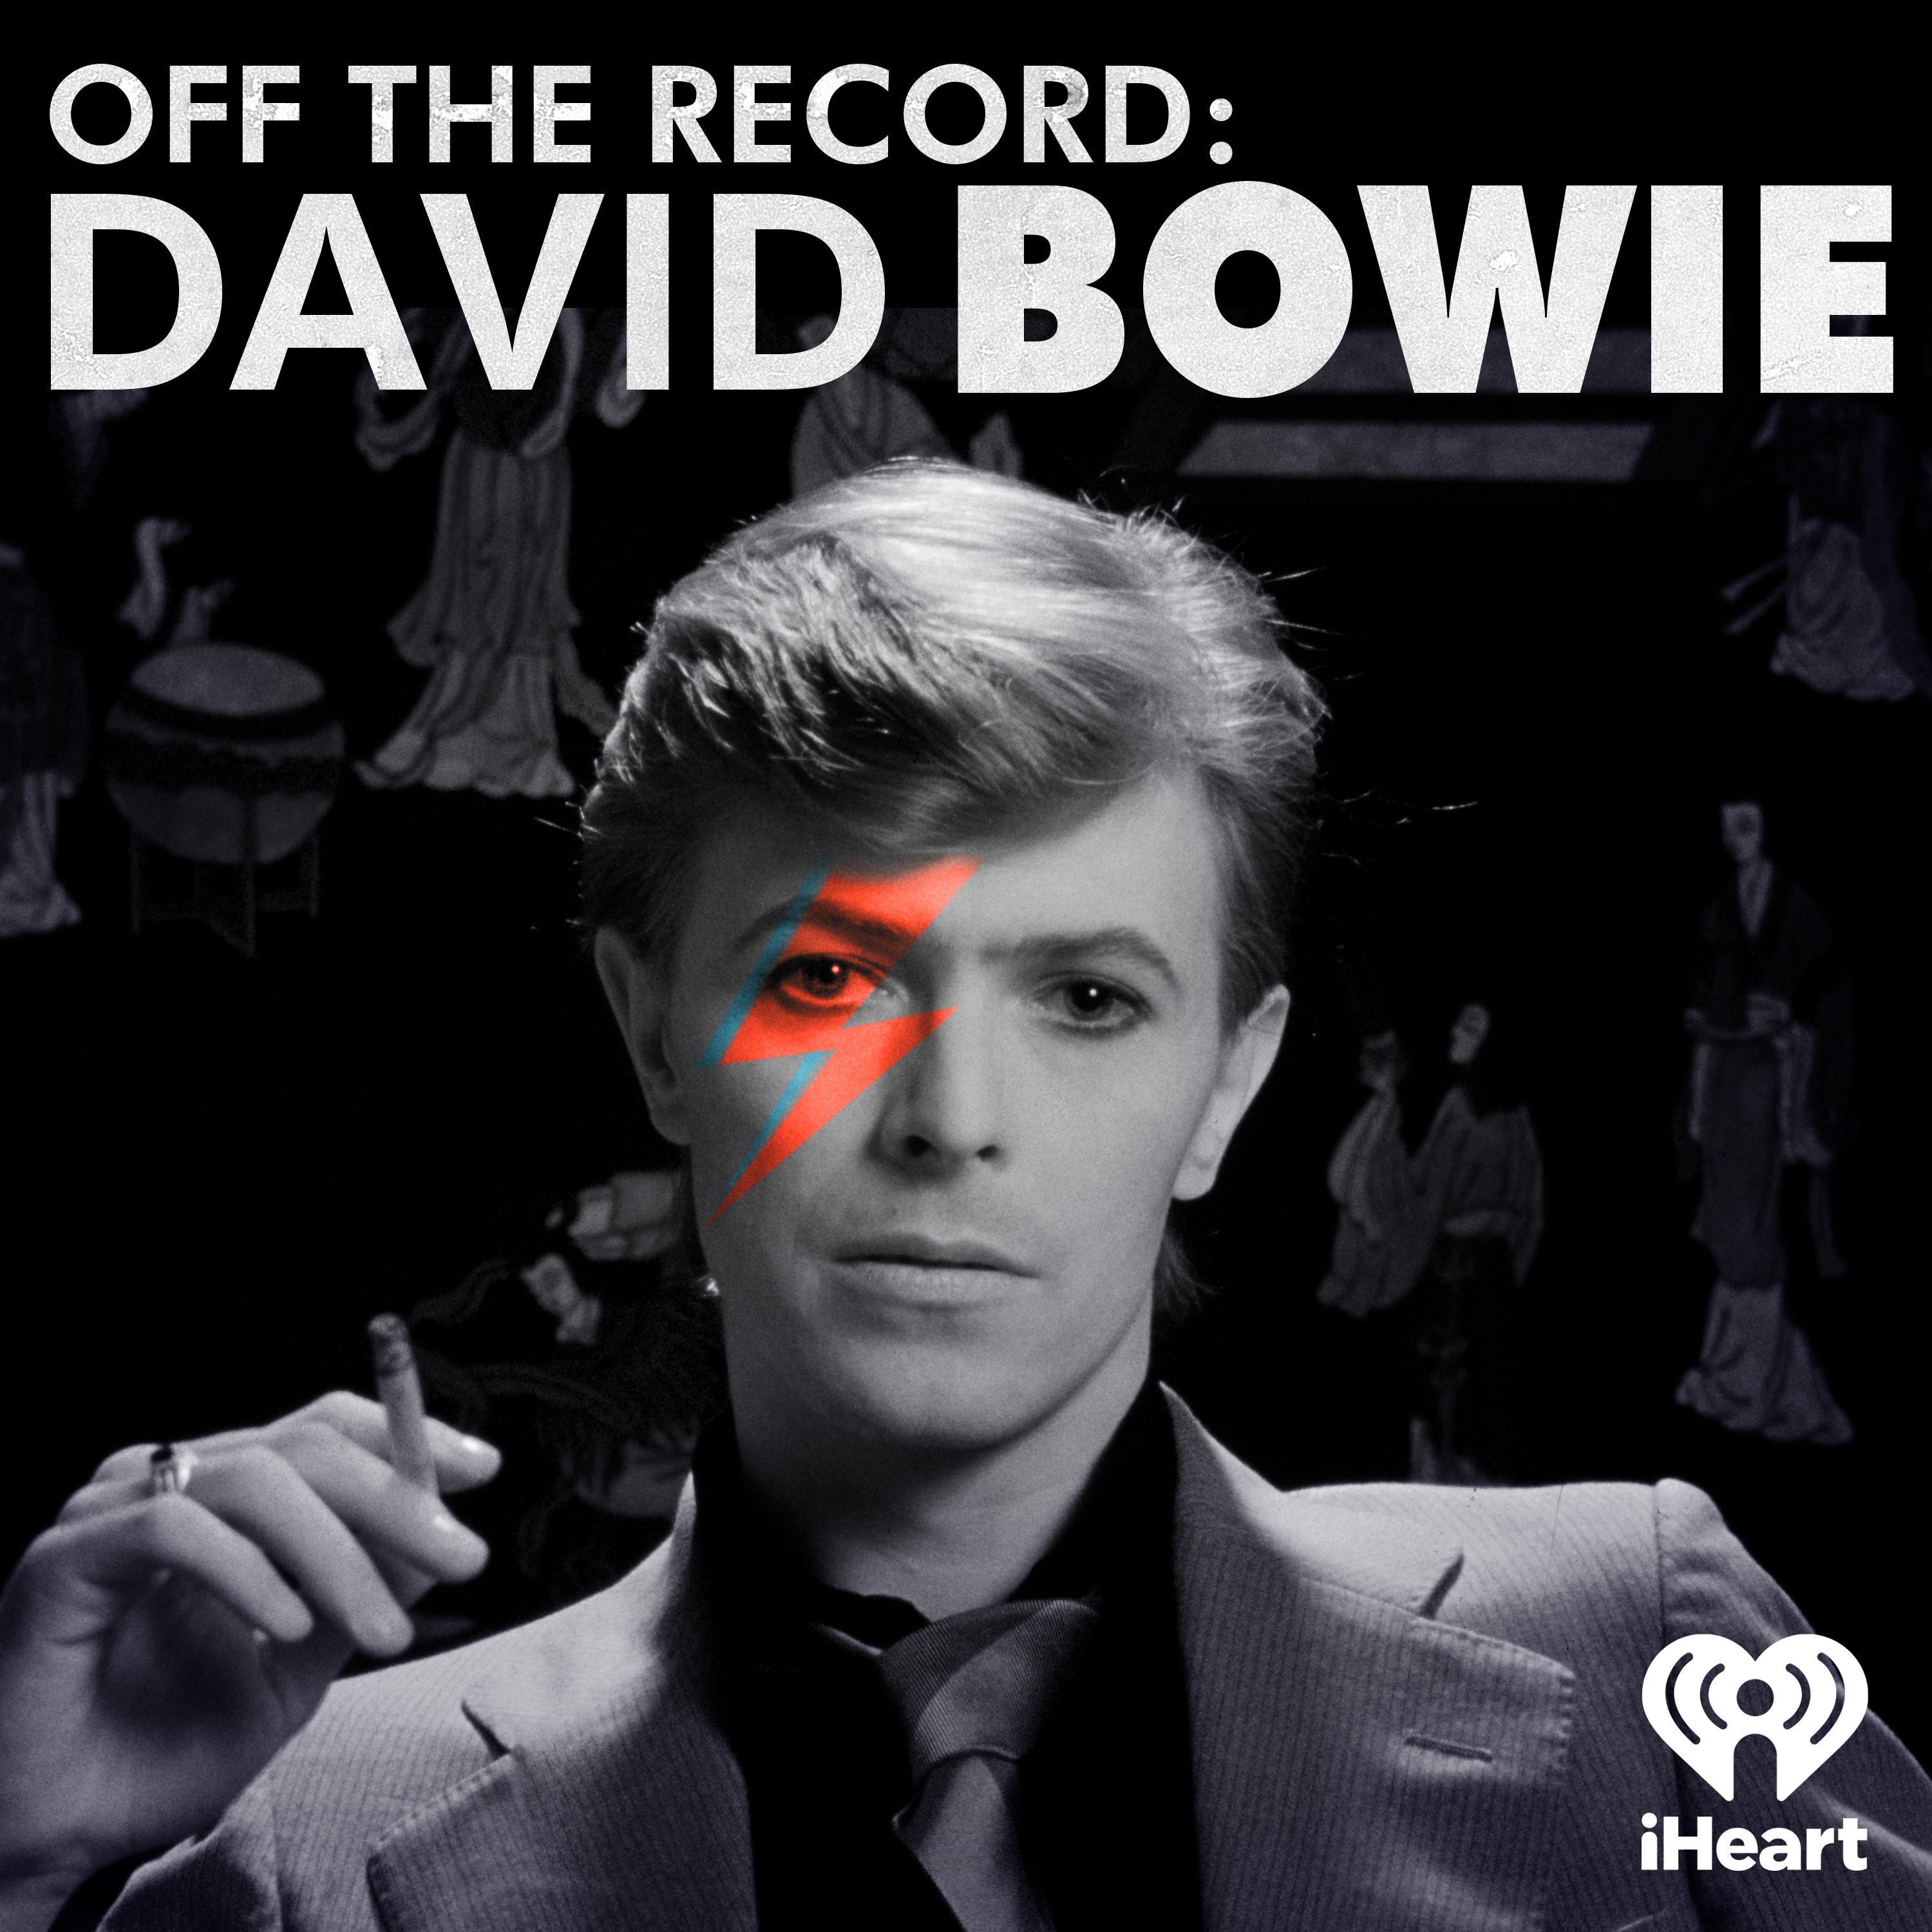 Bonus Episode: Bowie's Guitarist Carlos Alomar on Recording 'Young Americans' and the Berlin Trilogy, Co-Writing 'Fame' and Funking Up David's Music for 30 Years